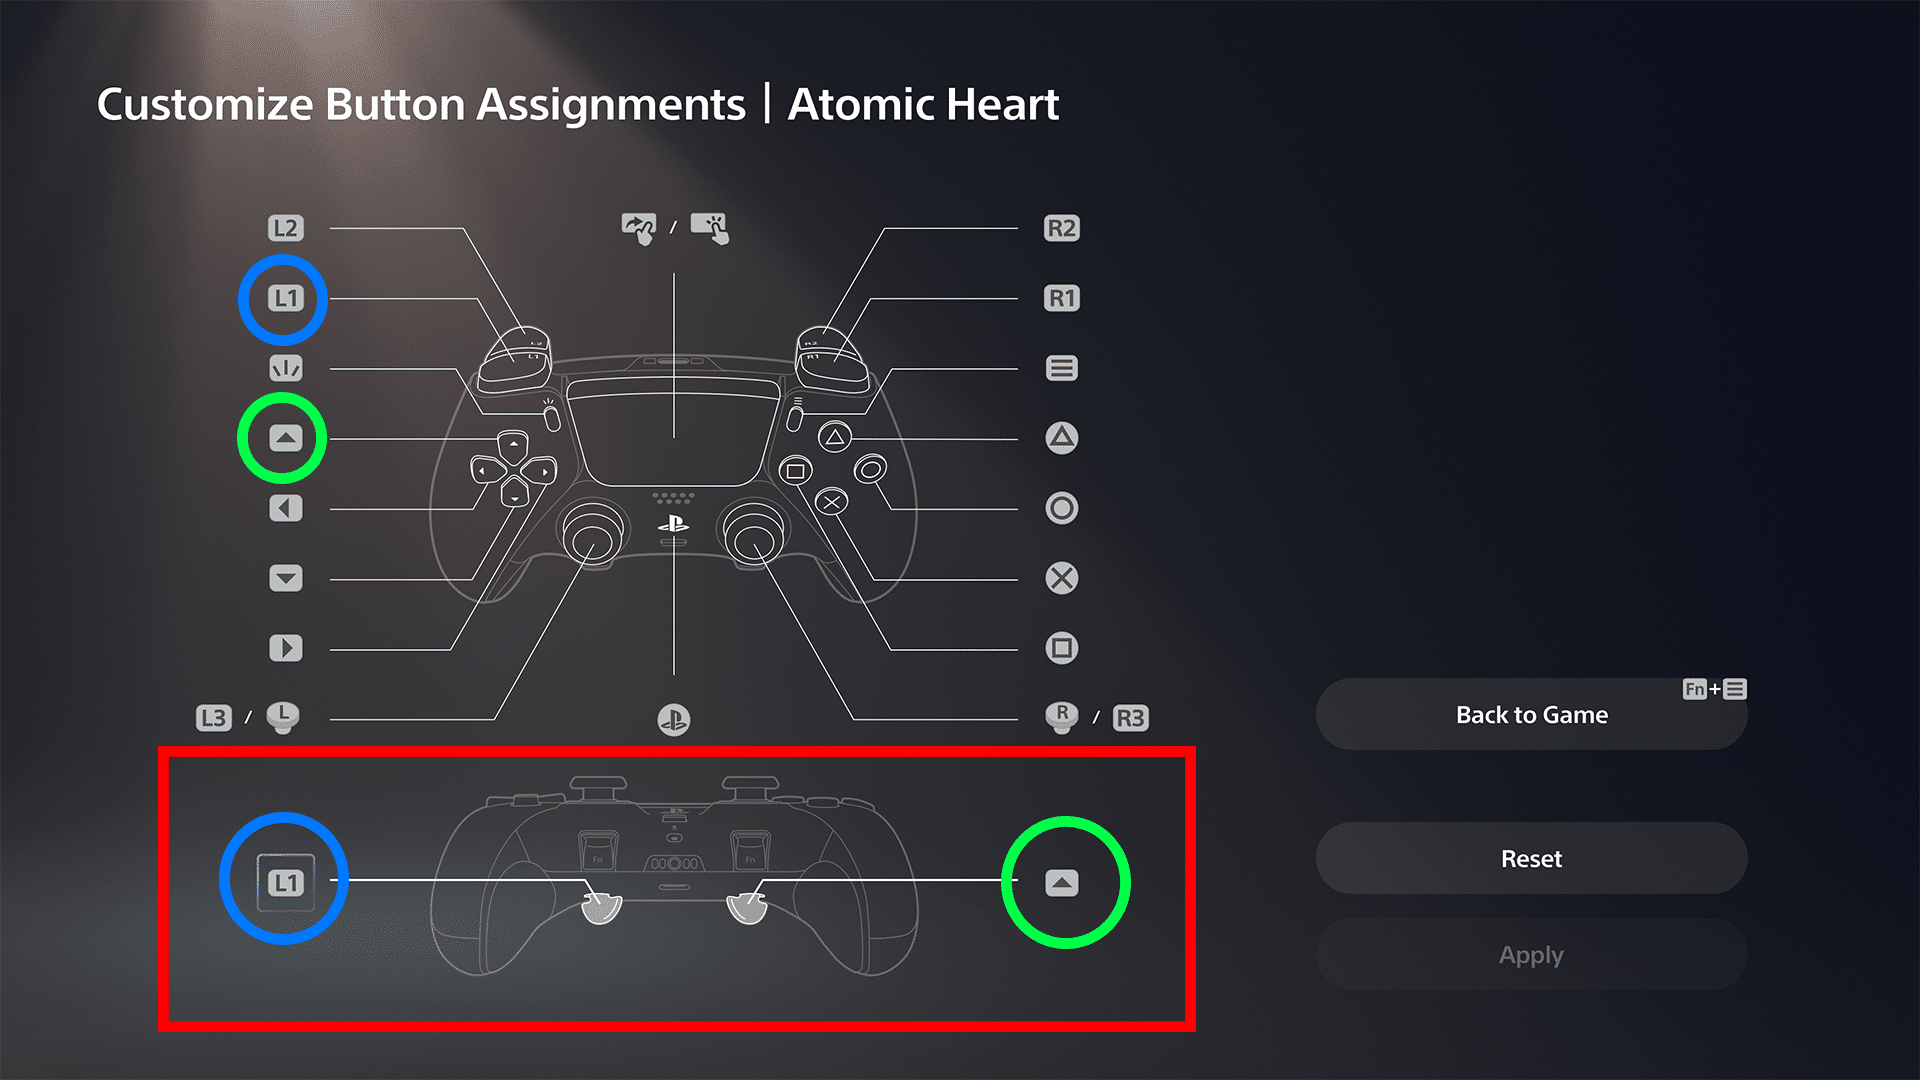 Atomic Heart Gêmeas - Suporte Controle Xbox Ps4 Ps5 Switch